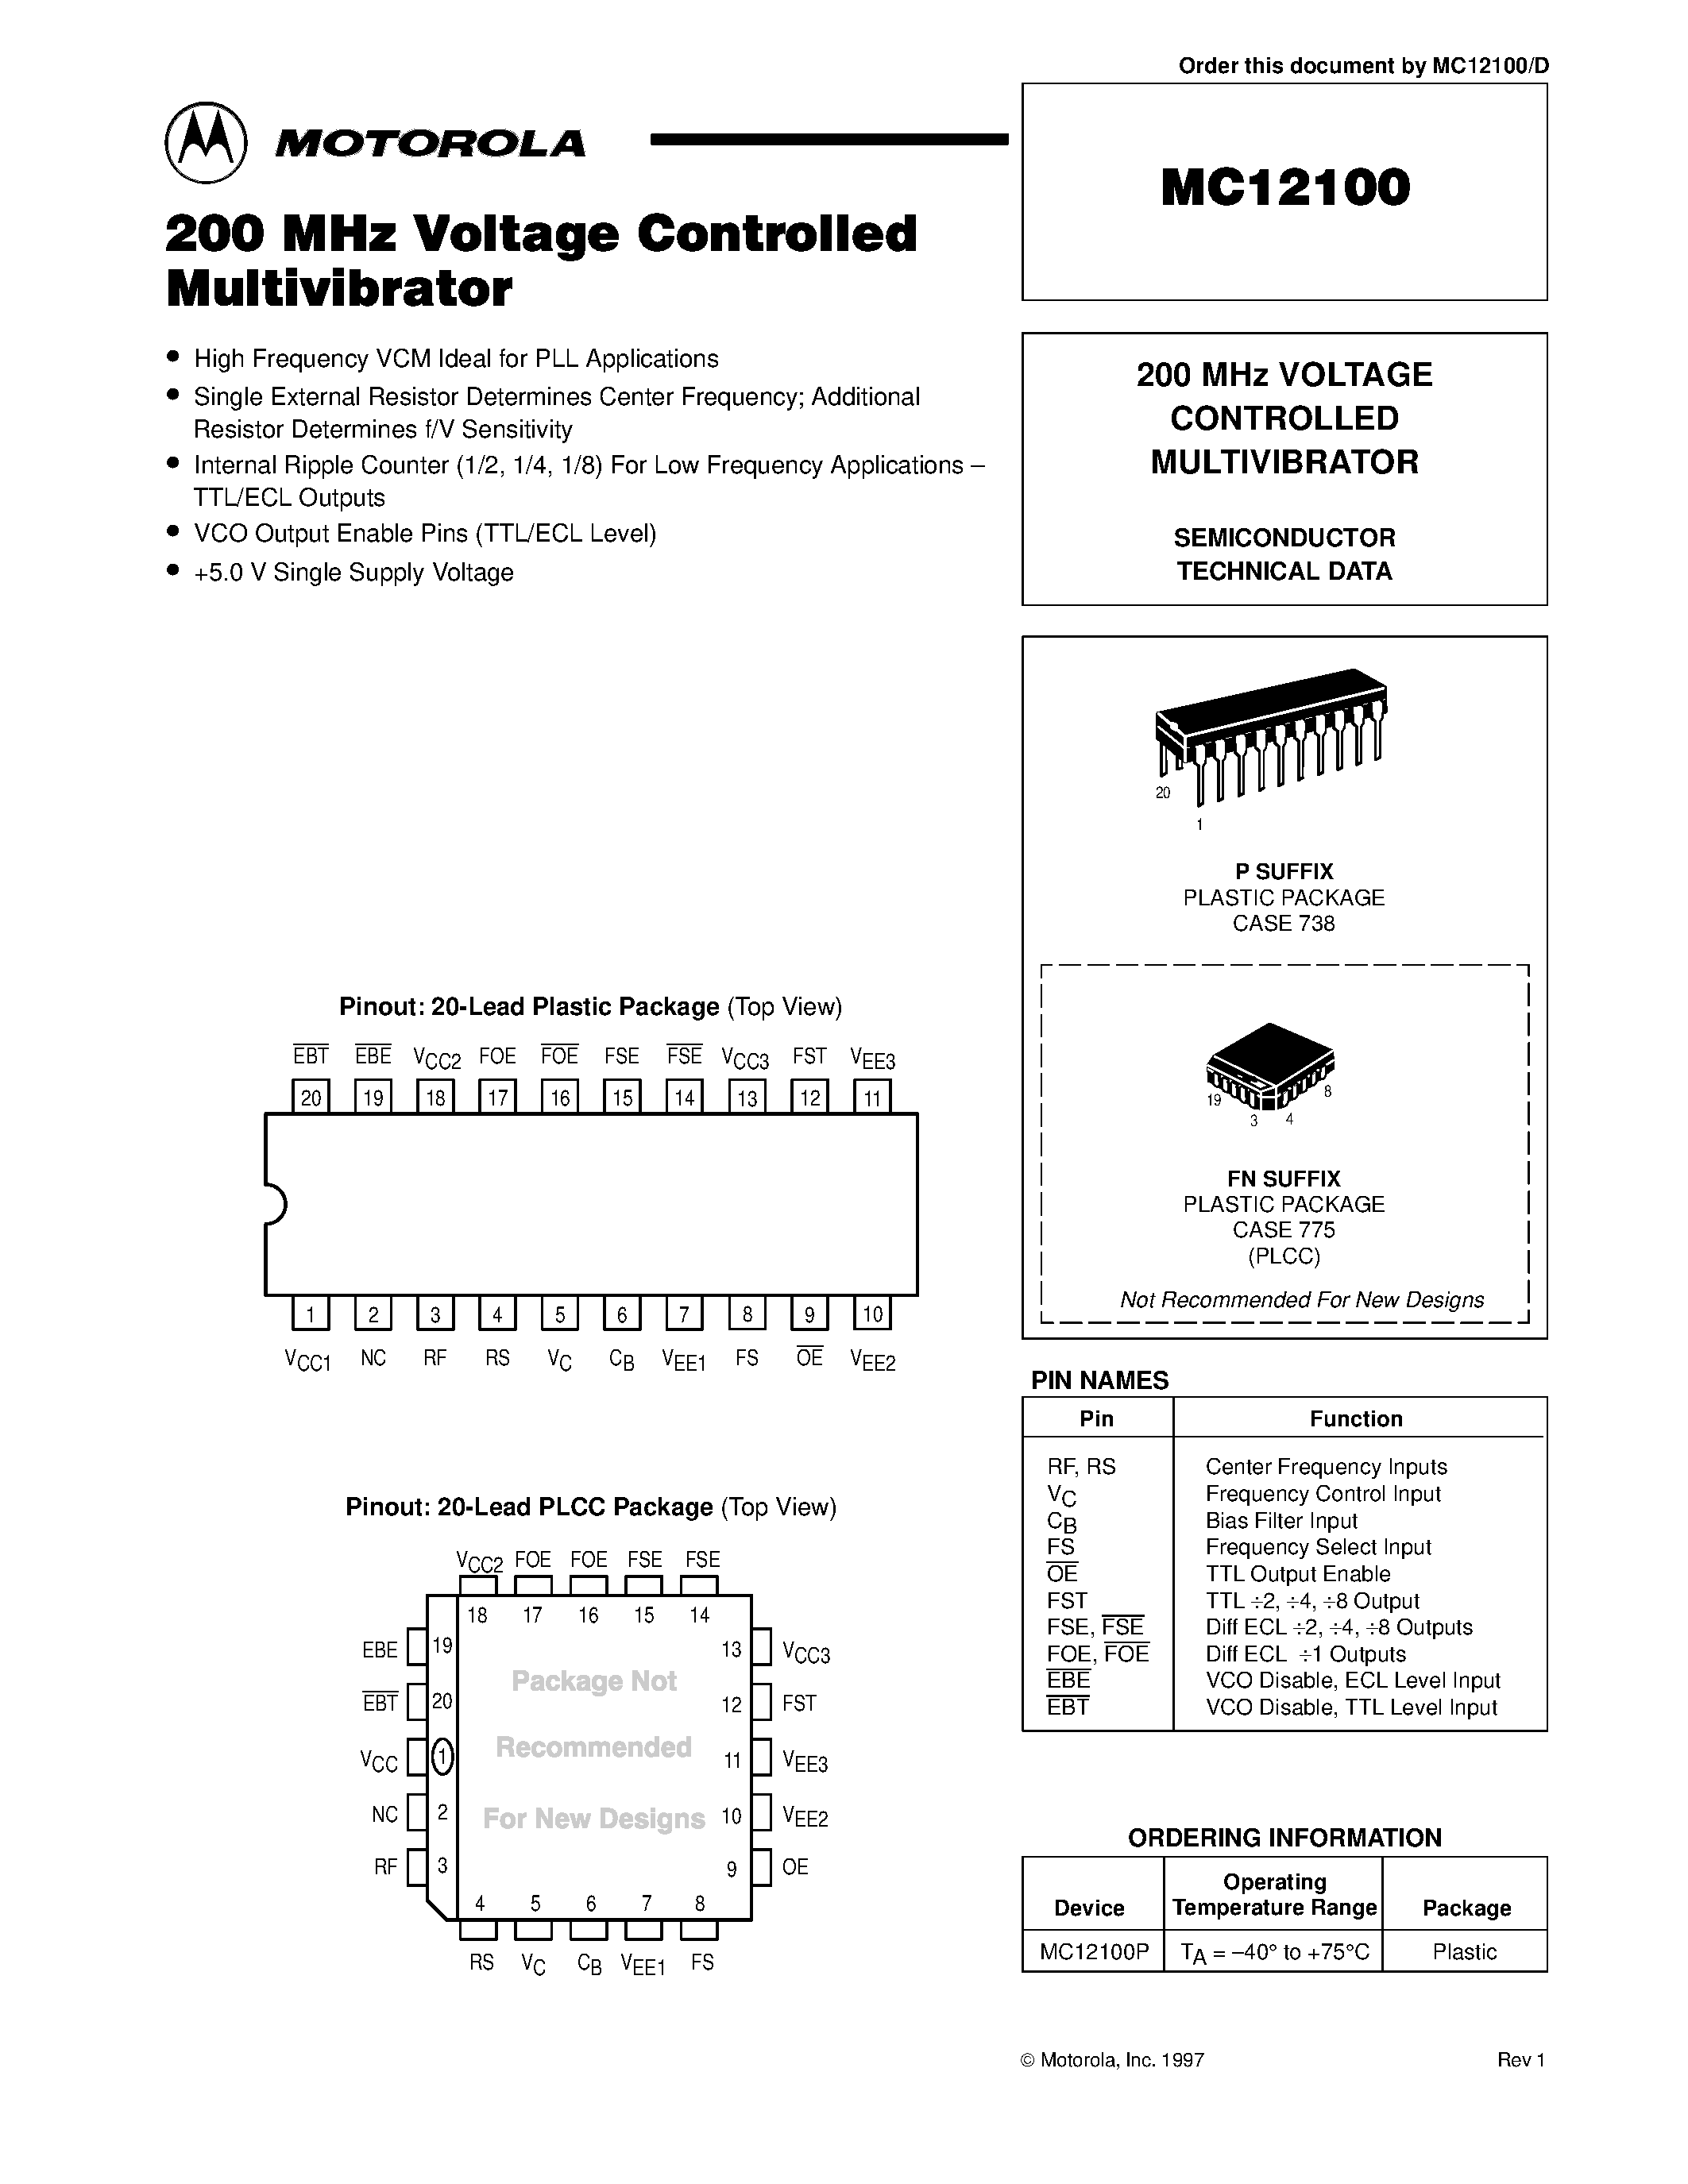 Datasheet MC12100FN - 200 MHz VOLTAGE CONTROLLED MULTIVIBRATOR page 1